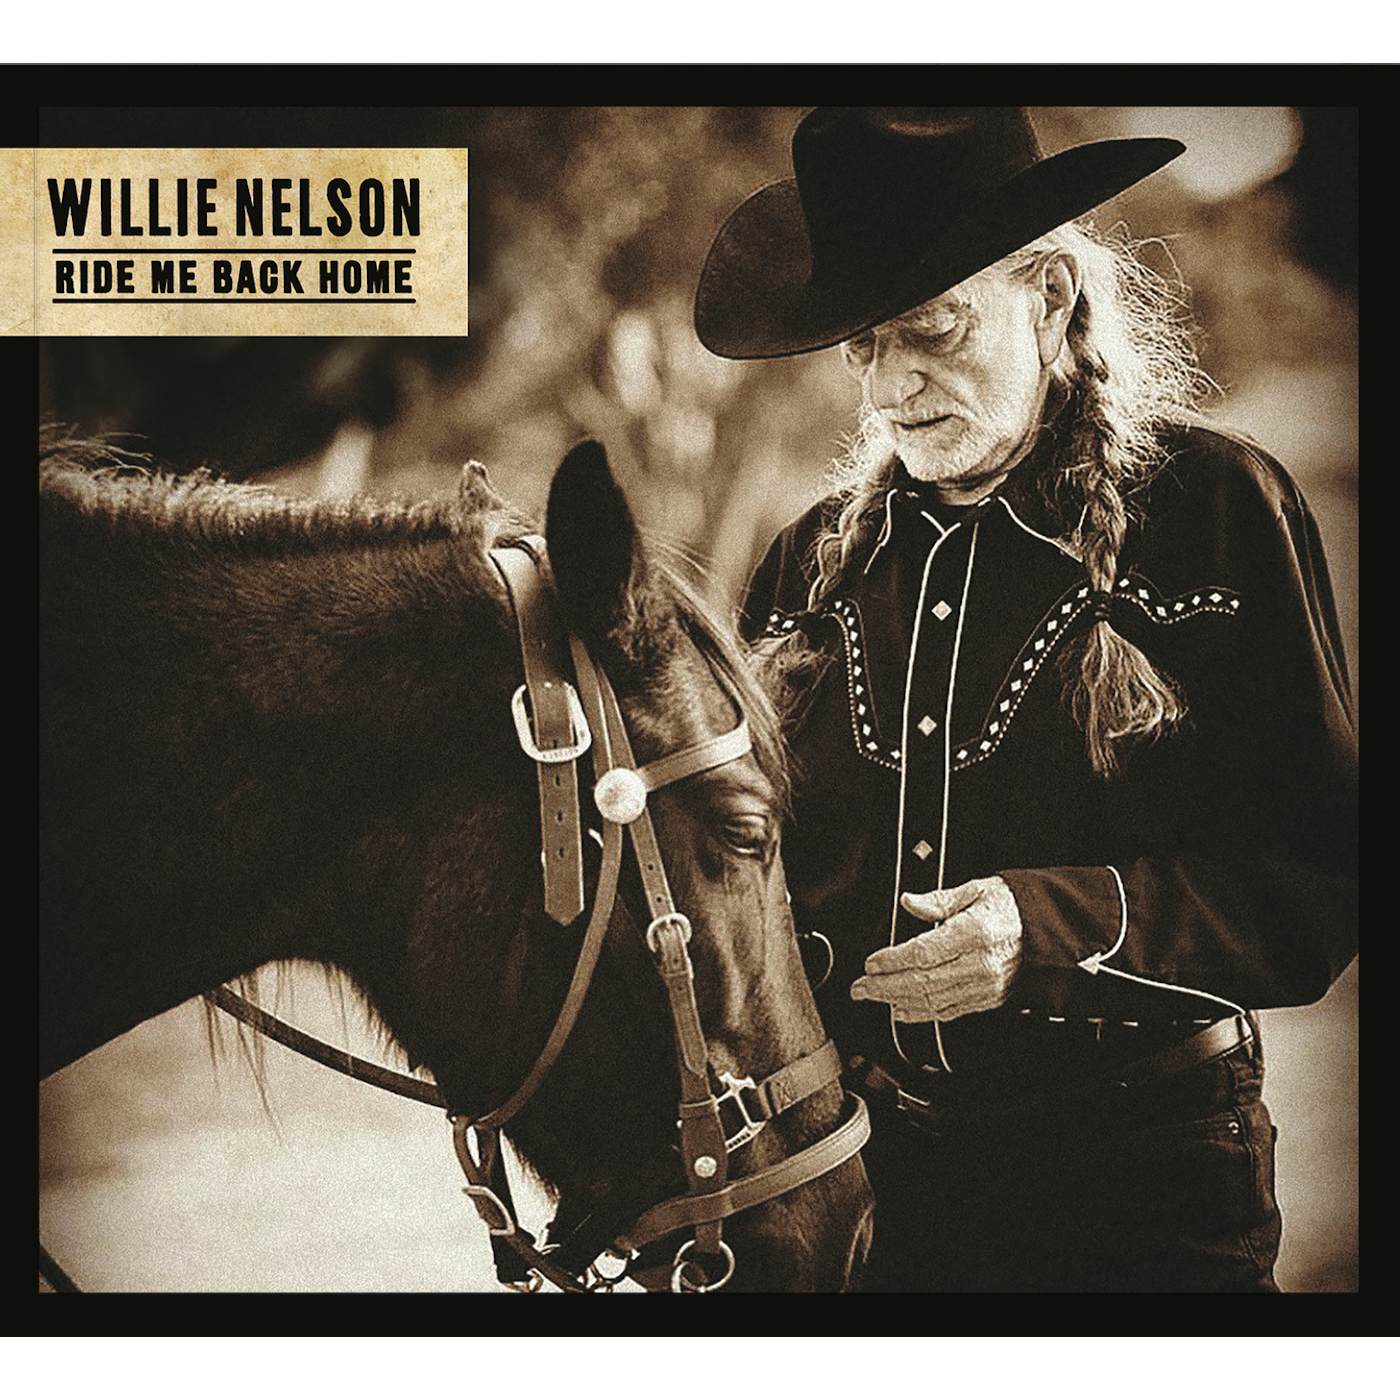 Willie Nelson RIDE ME BACK HOME CD